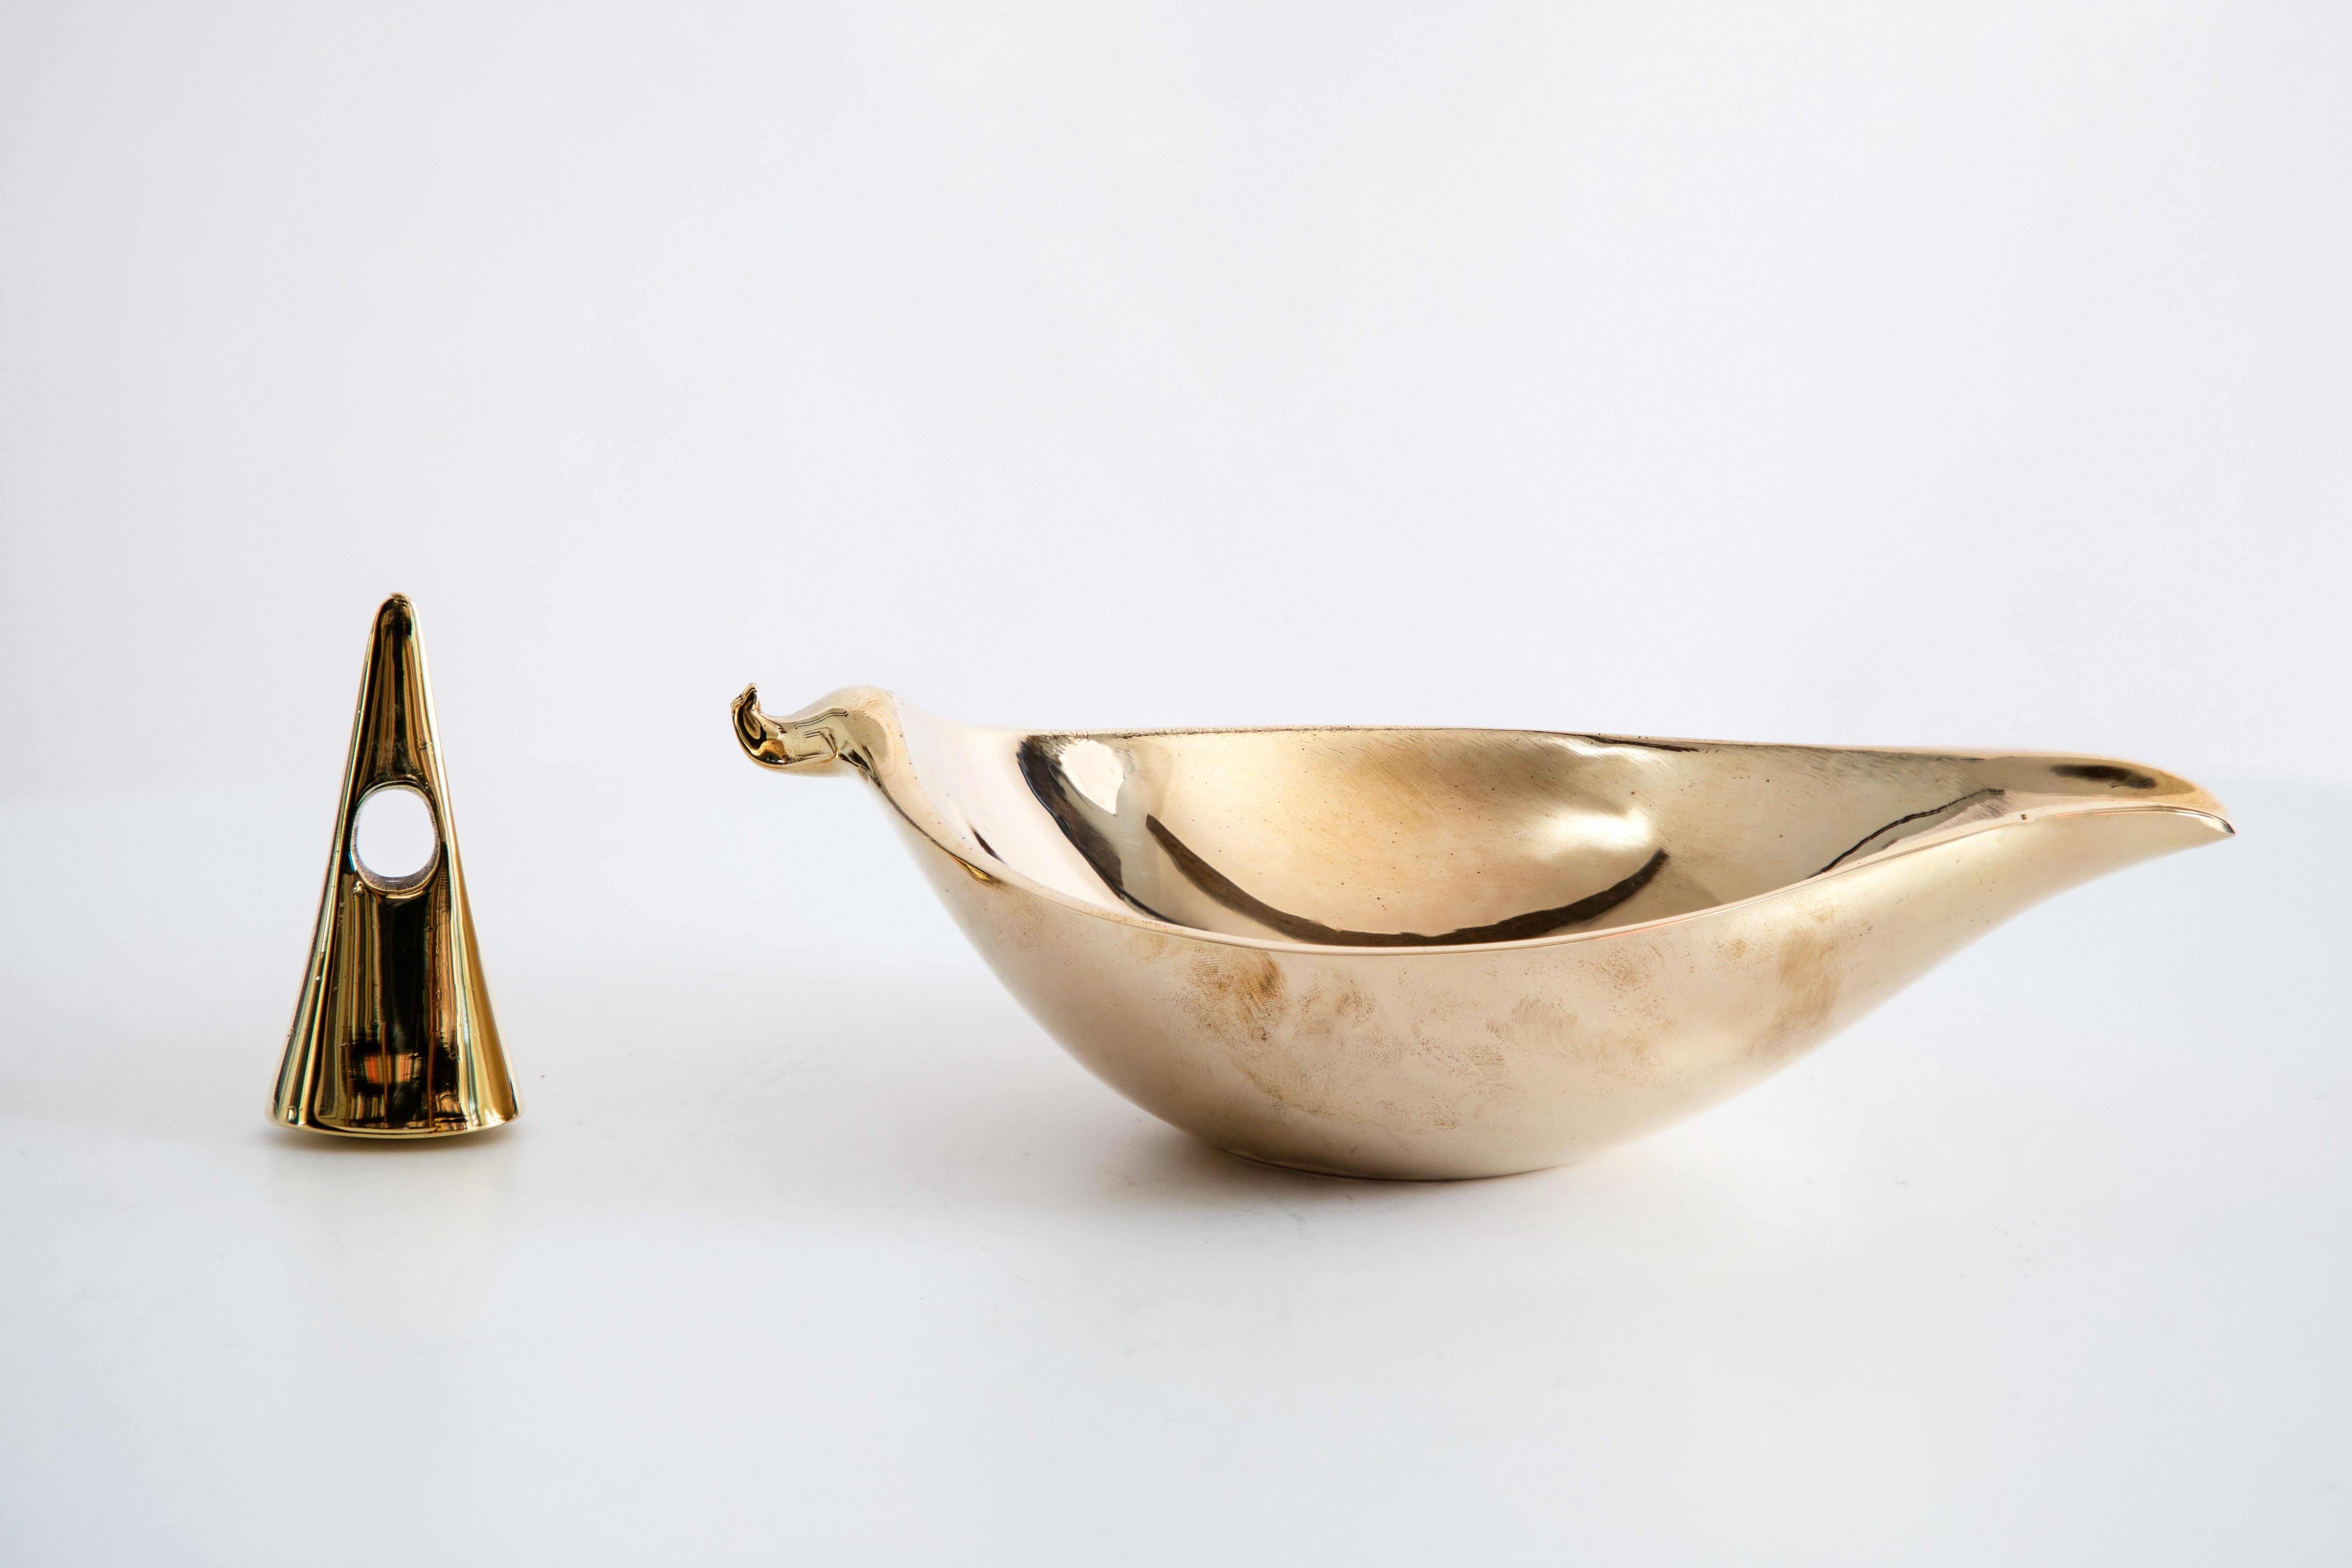 Carl Auböck model #3514 brass bowl. Designed in the 1950s, this incredibly refined and sculptural Viennese bowl is executed in polished brass. Originally conceived as an ashtray and snuffer, this decorative vessel can be used for a variety of